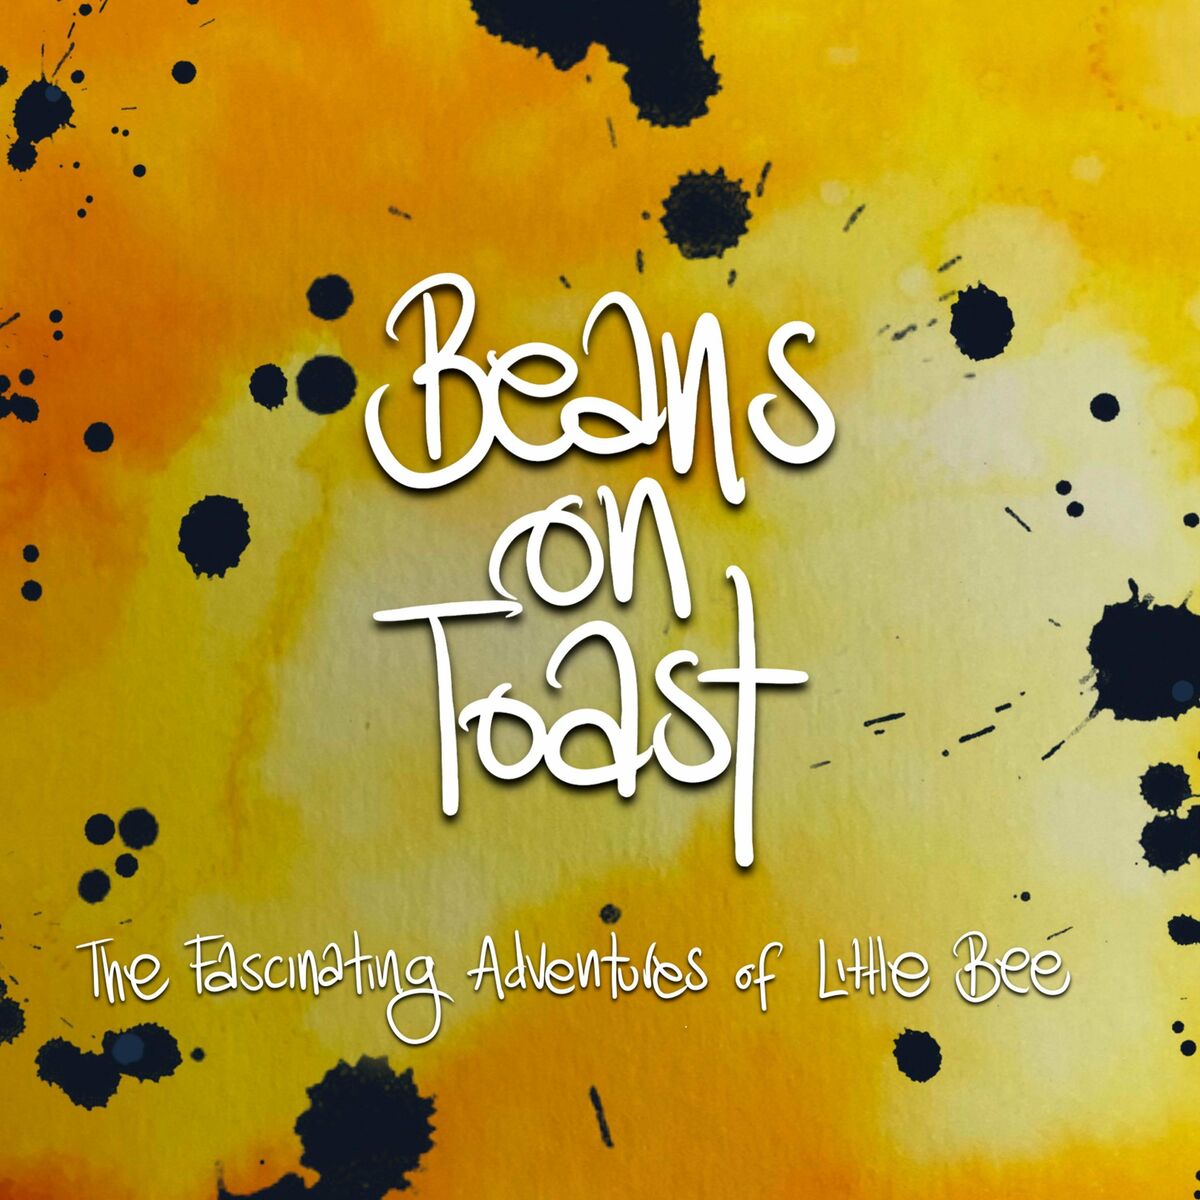 Beans On Toast - 2022 - The Fascinating Adventures of Little Bee (RESPOT)